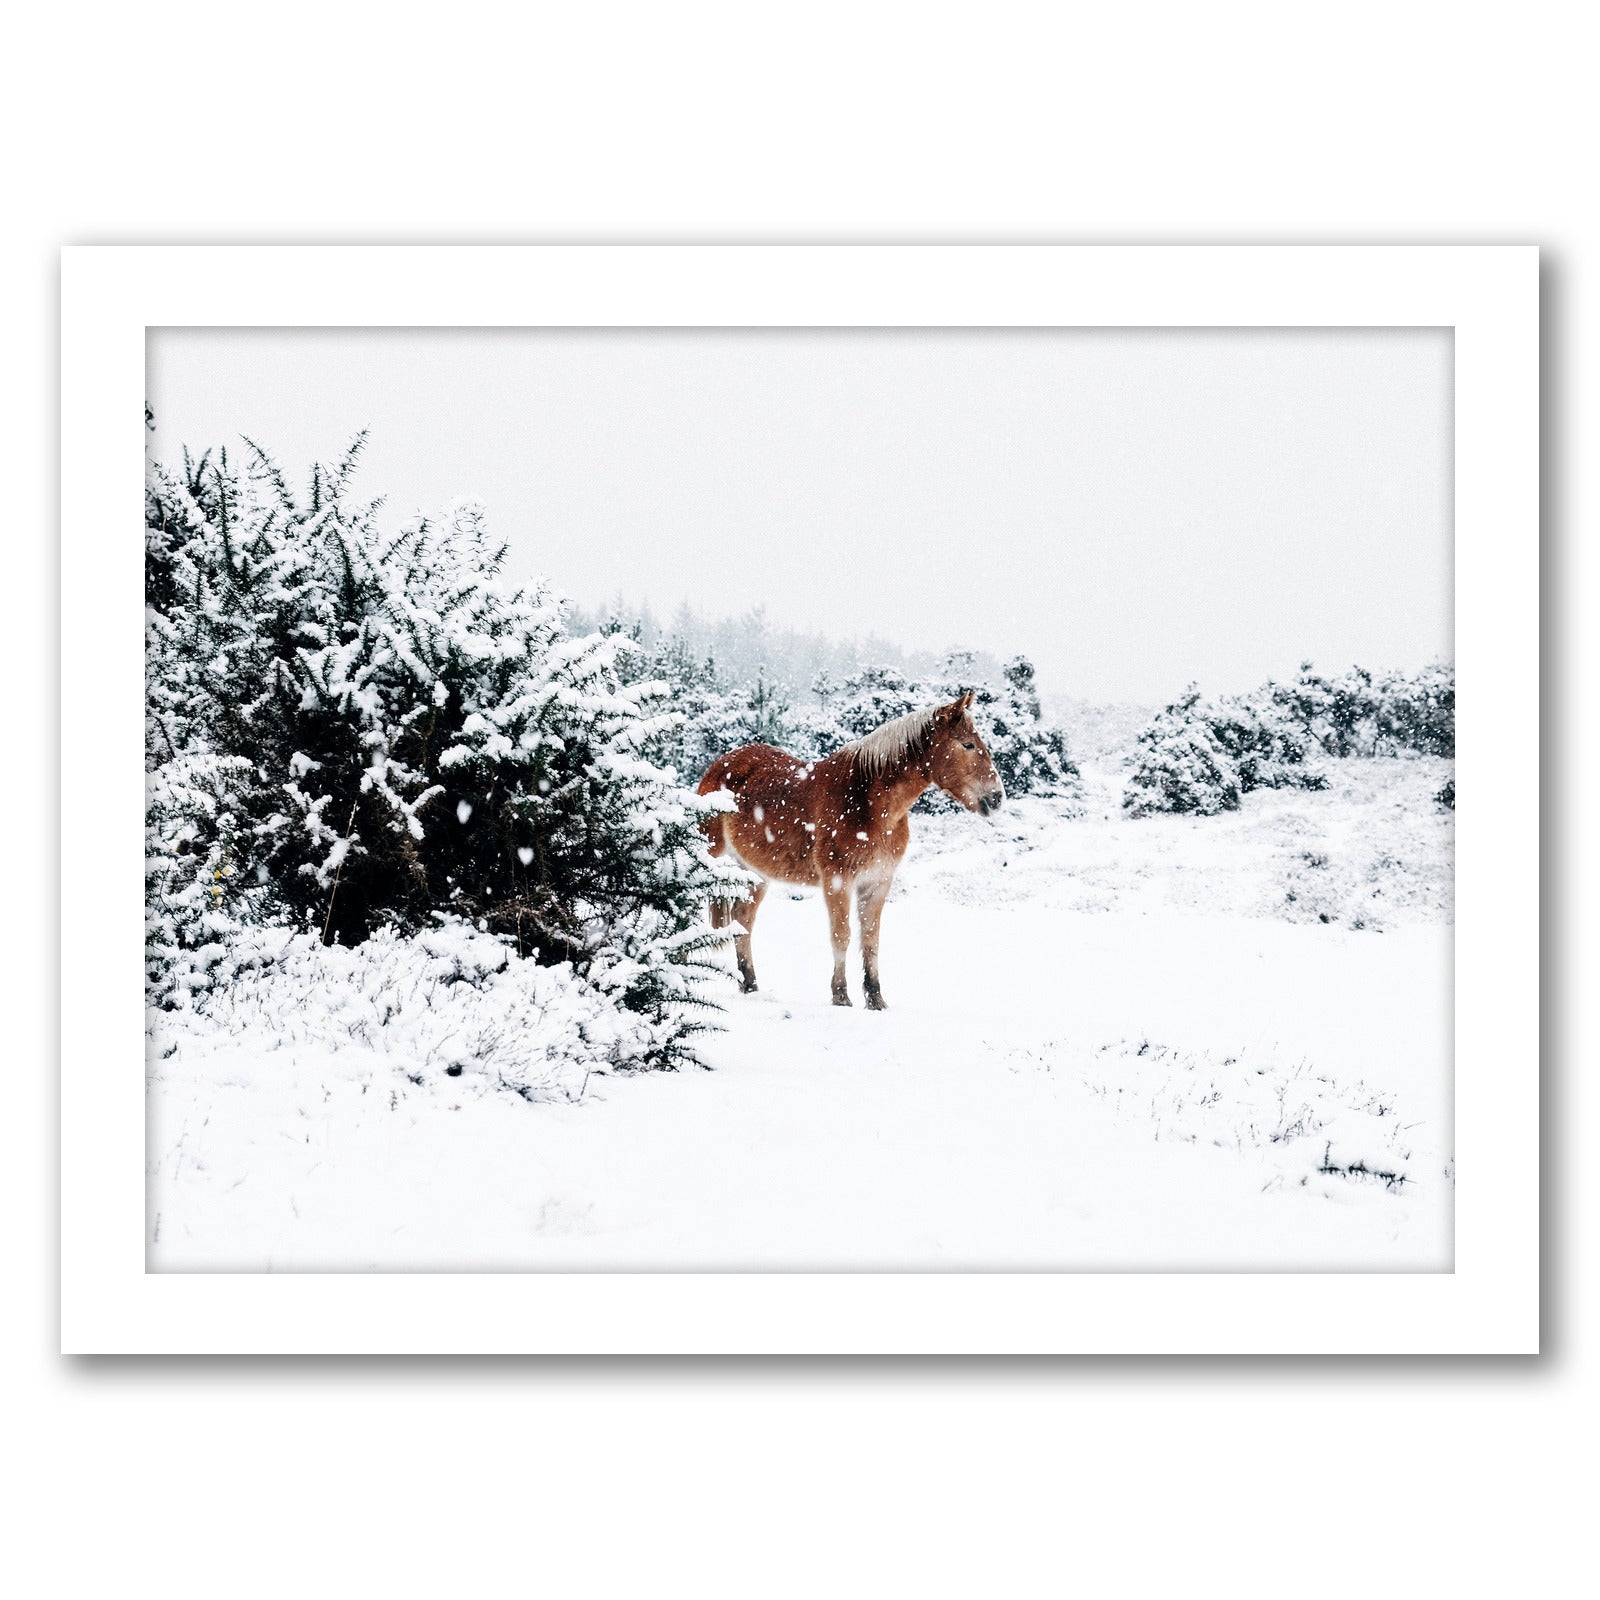 Horse In Snow by Tanya Shumkina - White Framed Print - Wall Art - Americanflat